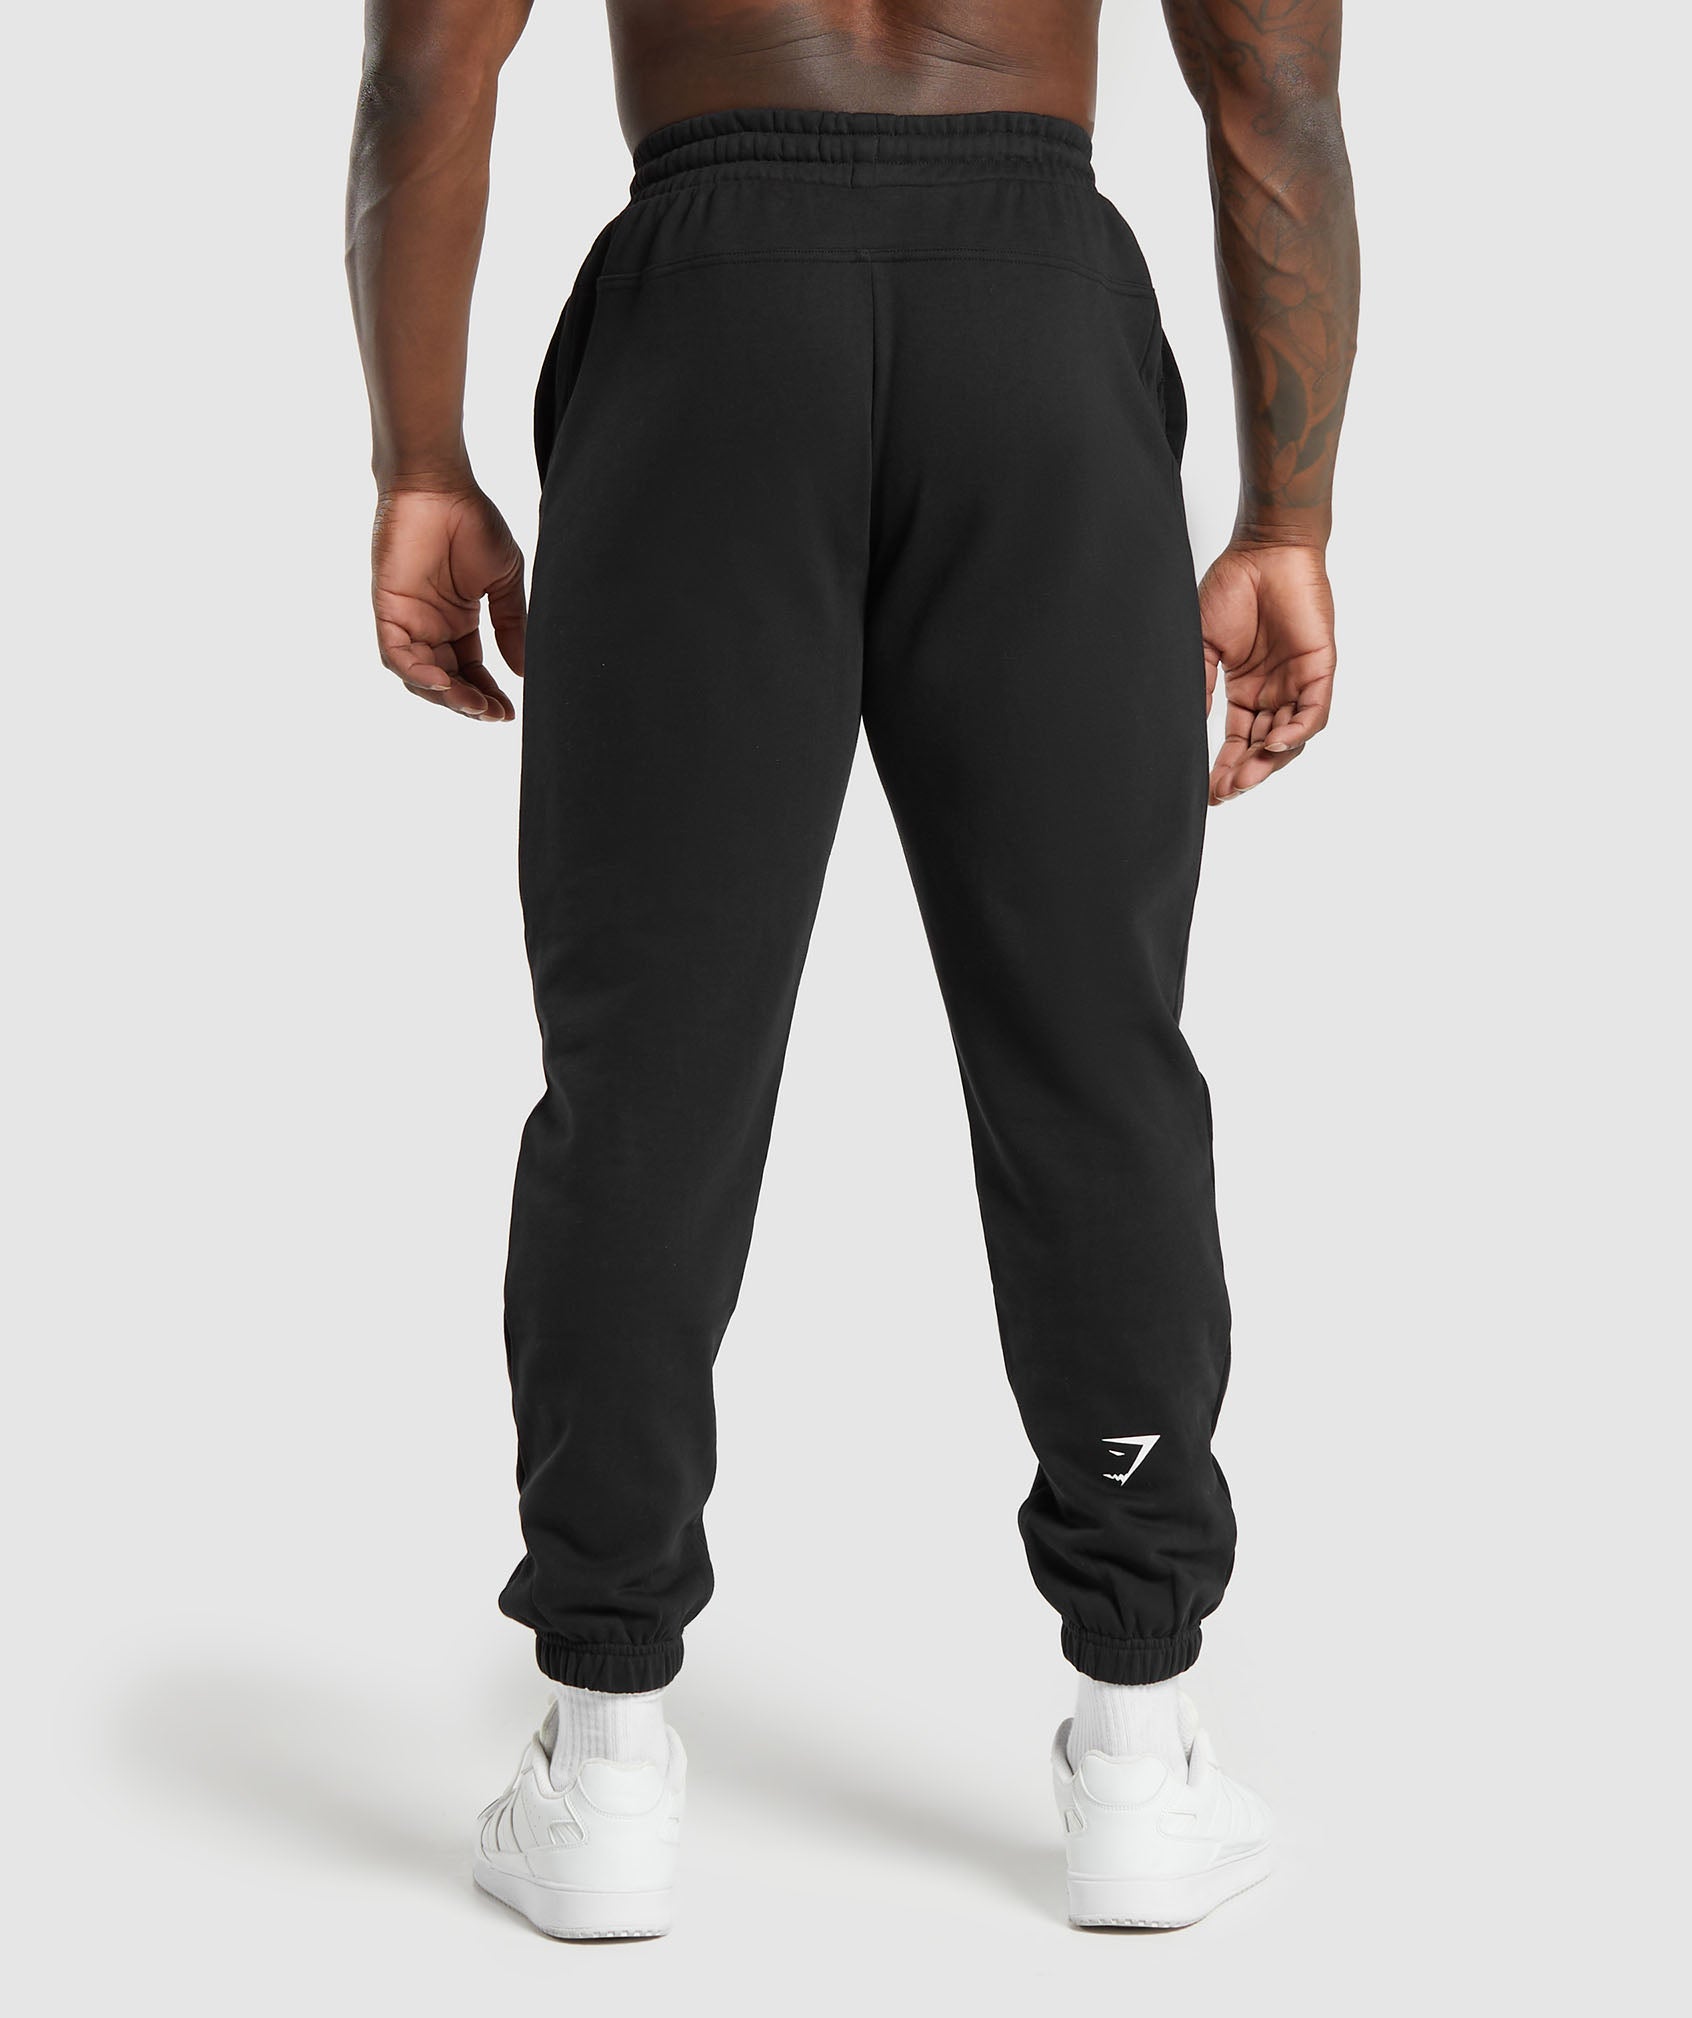 Property Of Joggers in Black - view 2